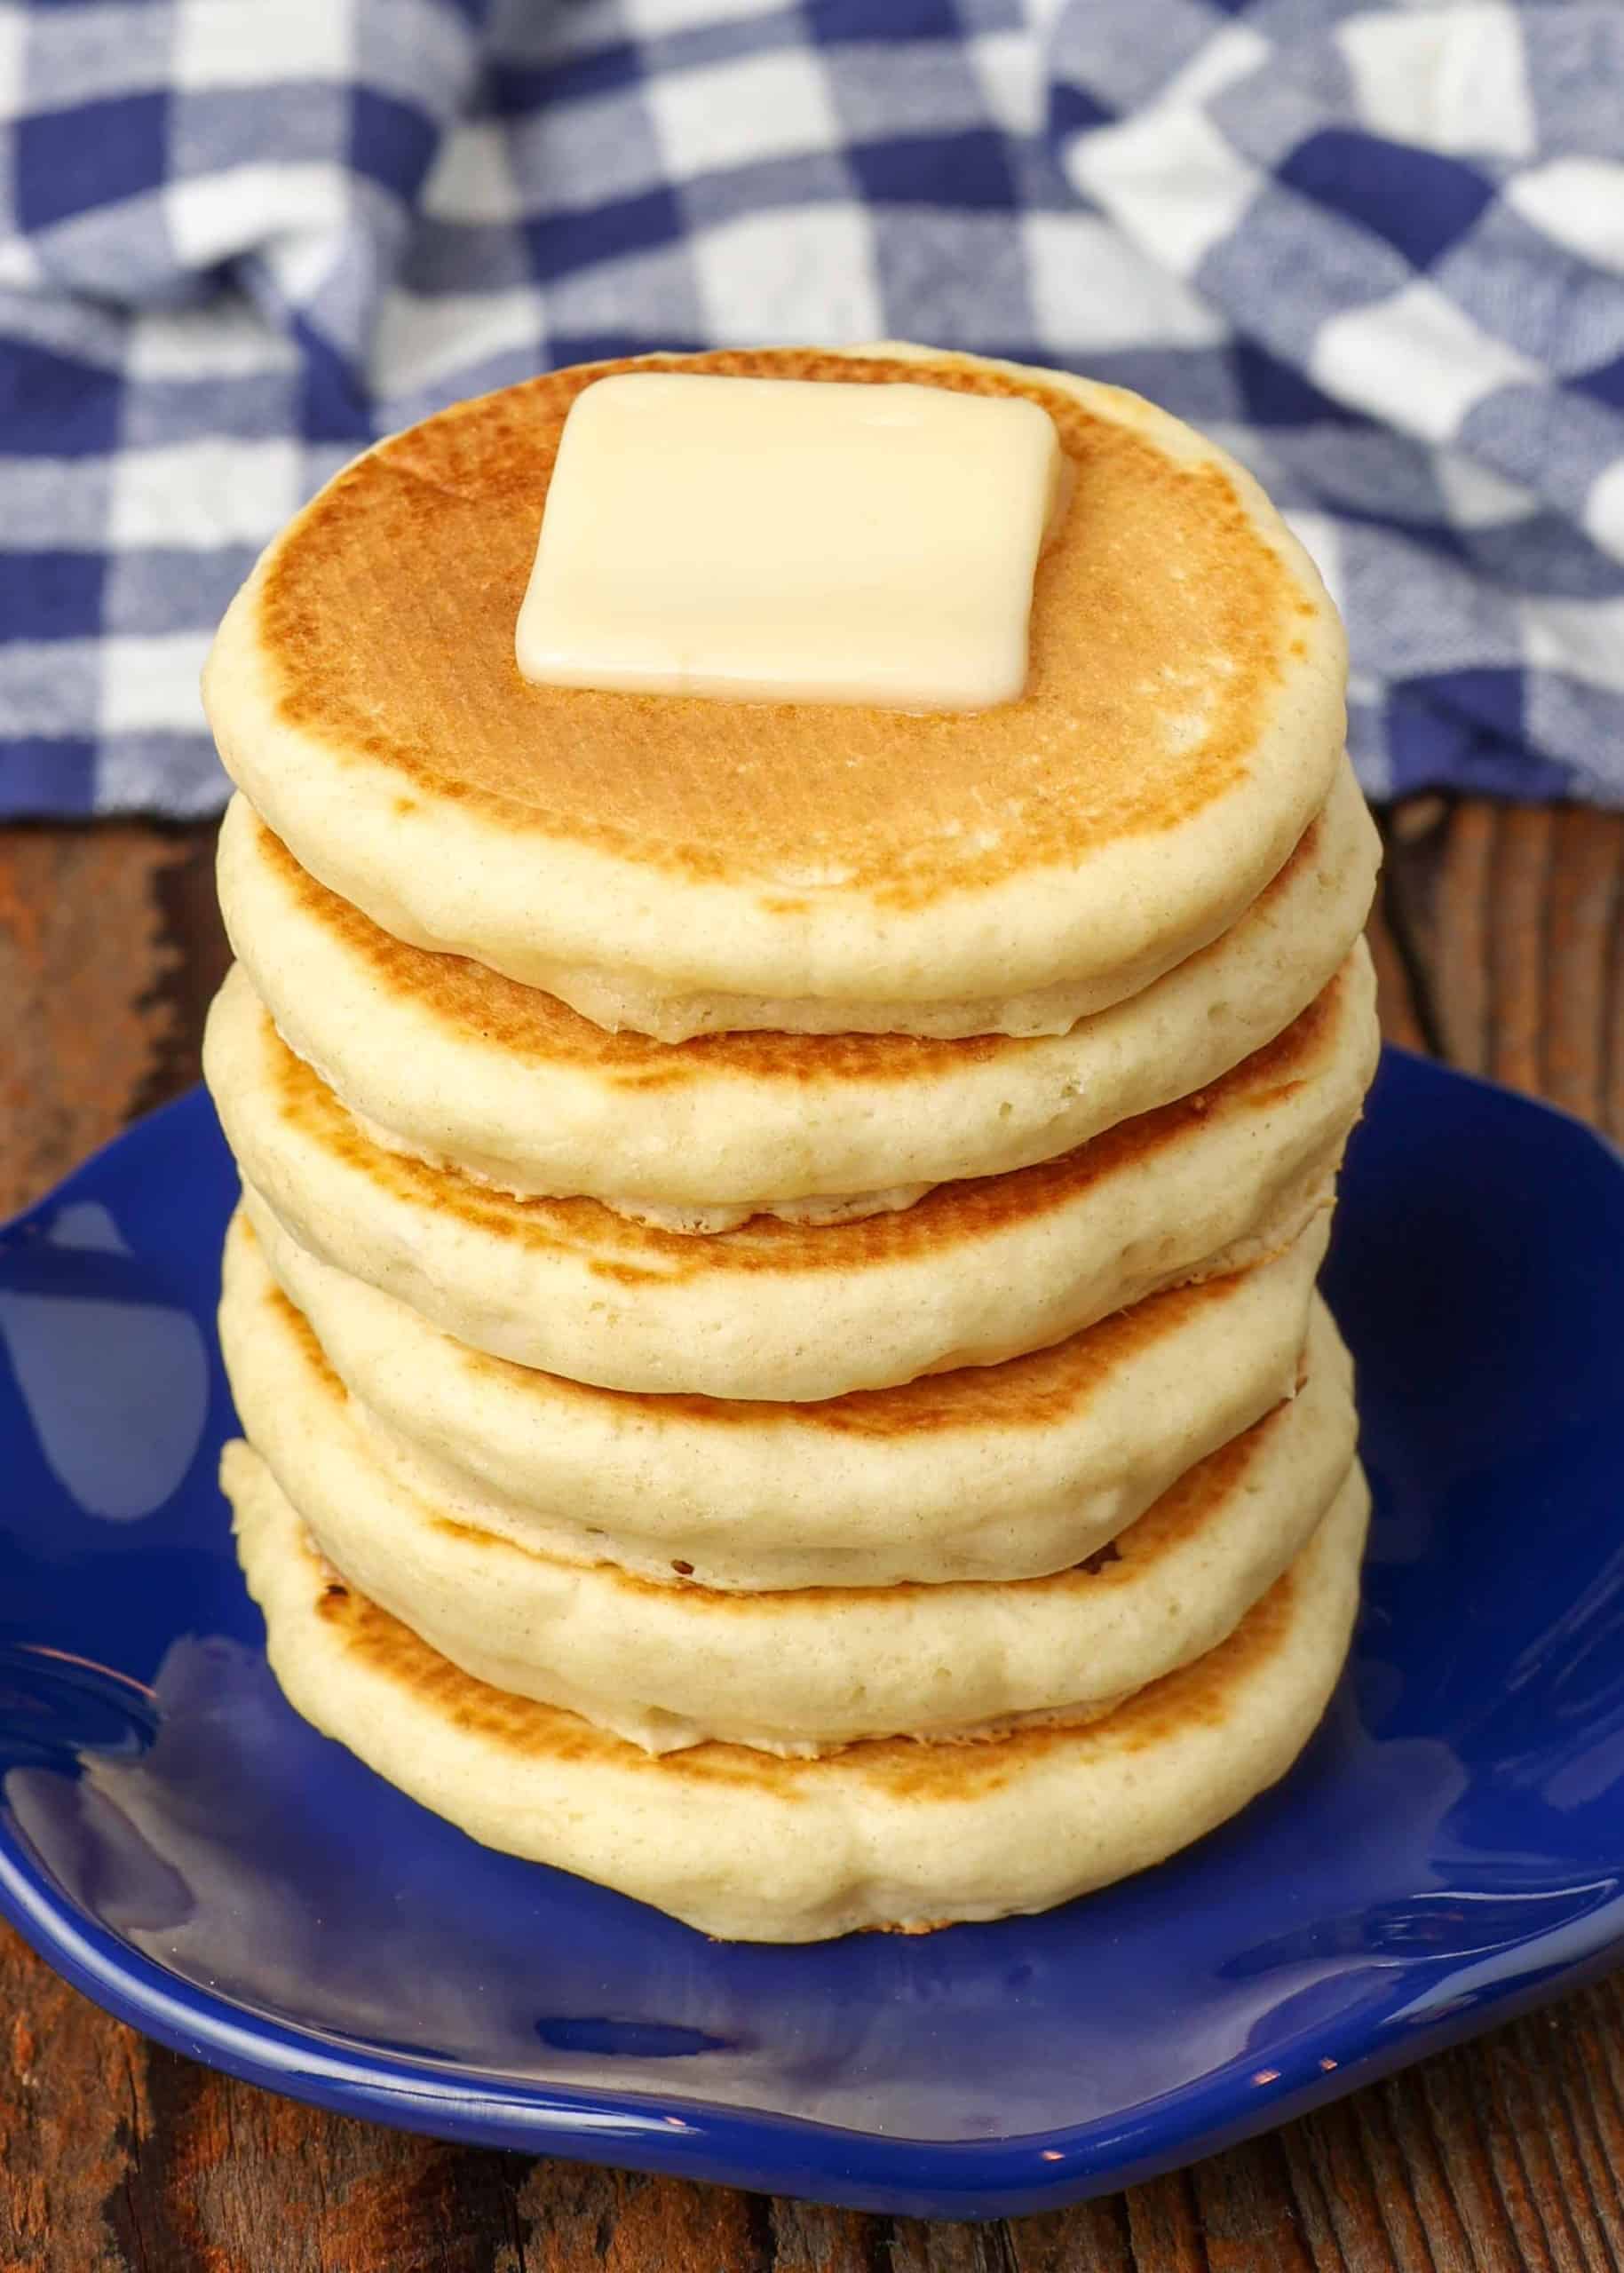 https://chocolatewithgrace.com/wp-content/uploads/2022/11/Silver-Dollar-Pancakes-CWG-5-1-of-1-scaled.jpg